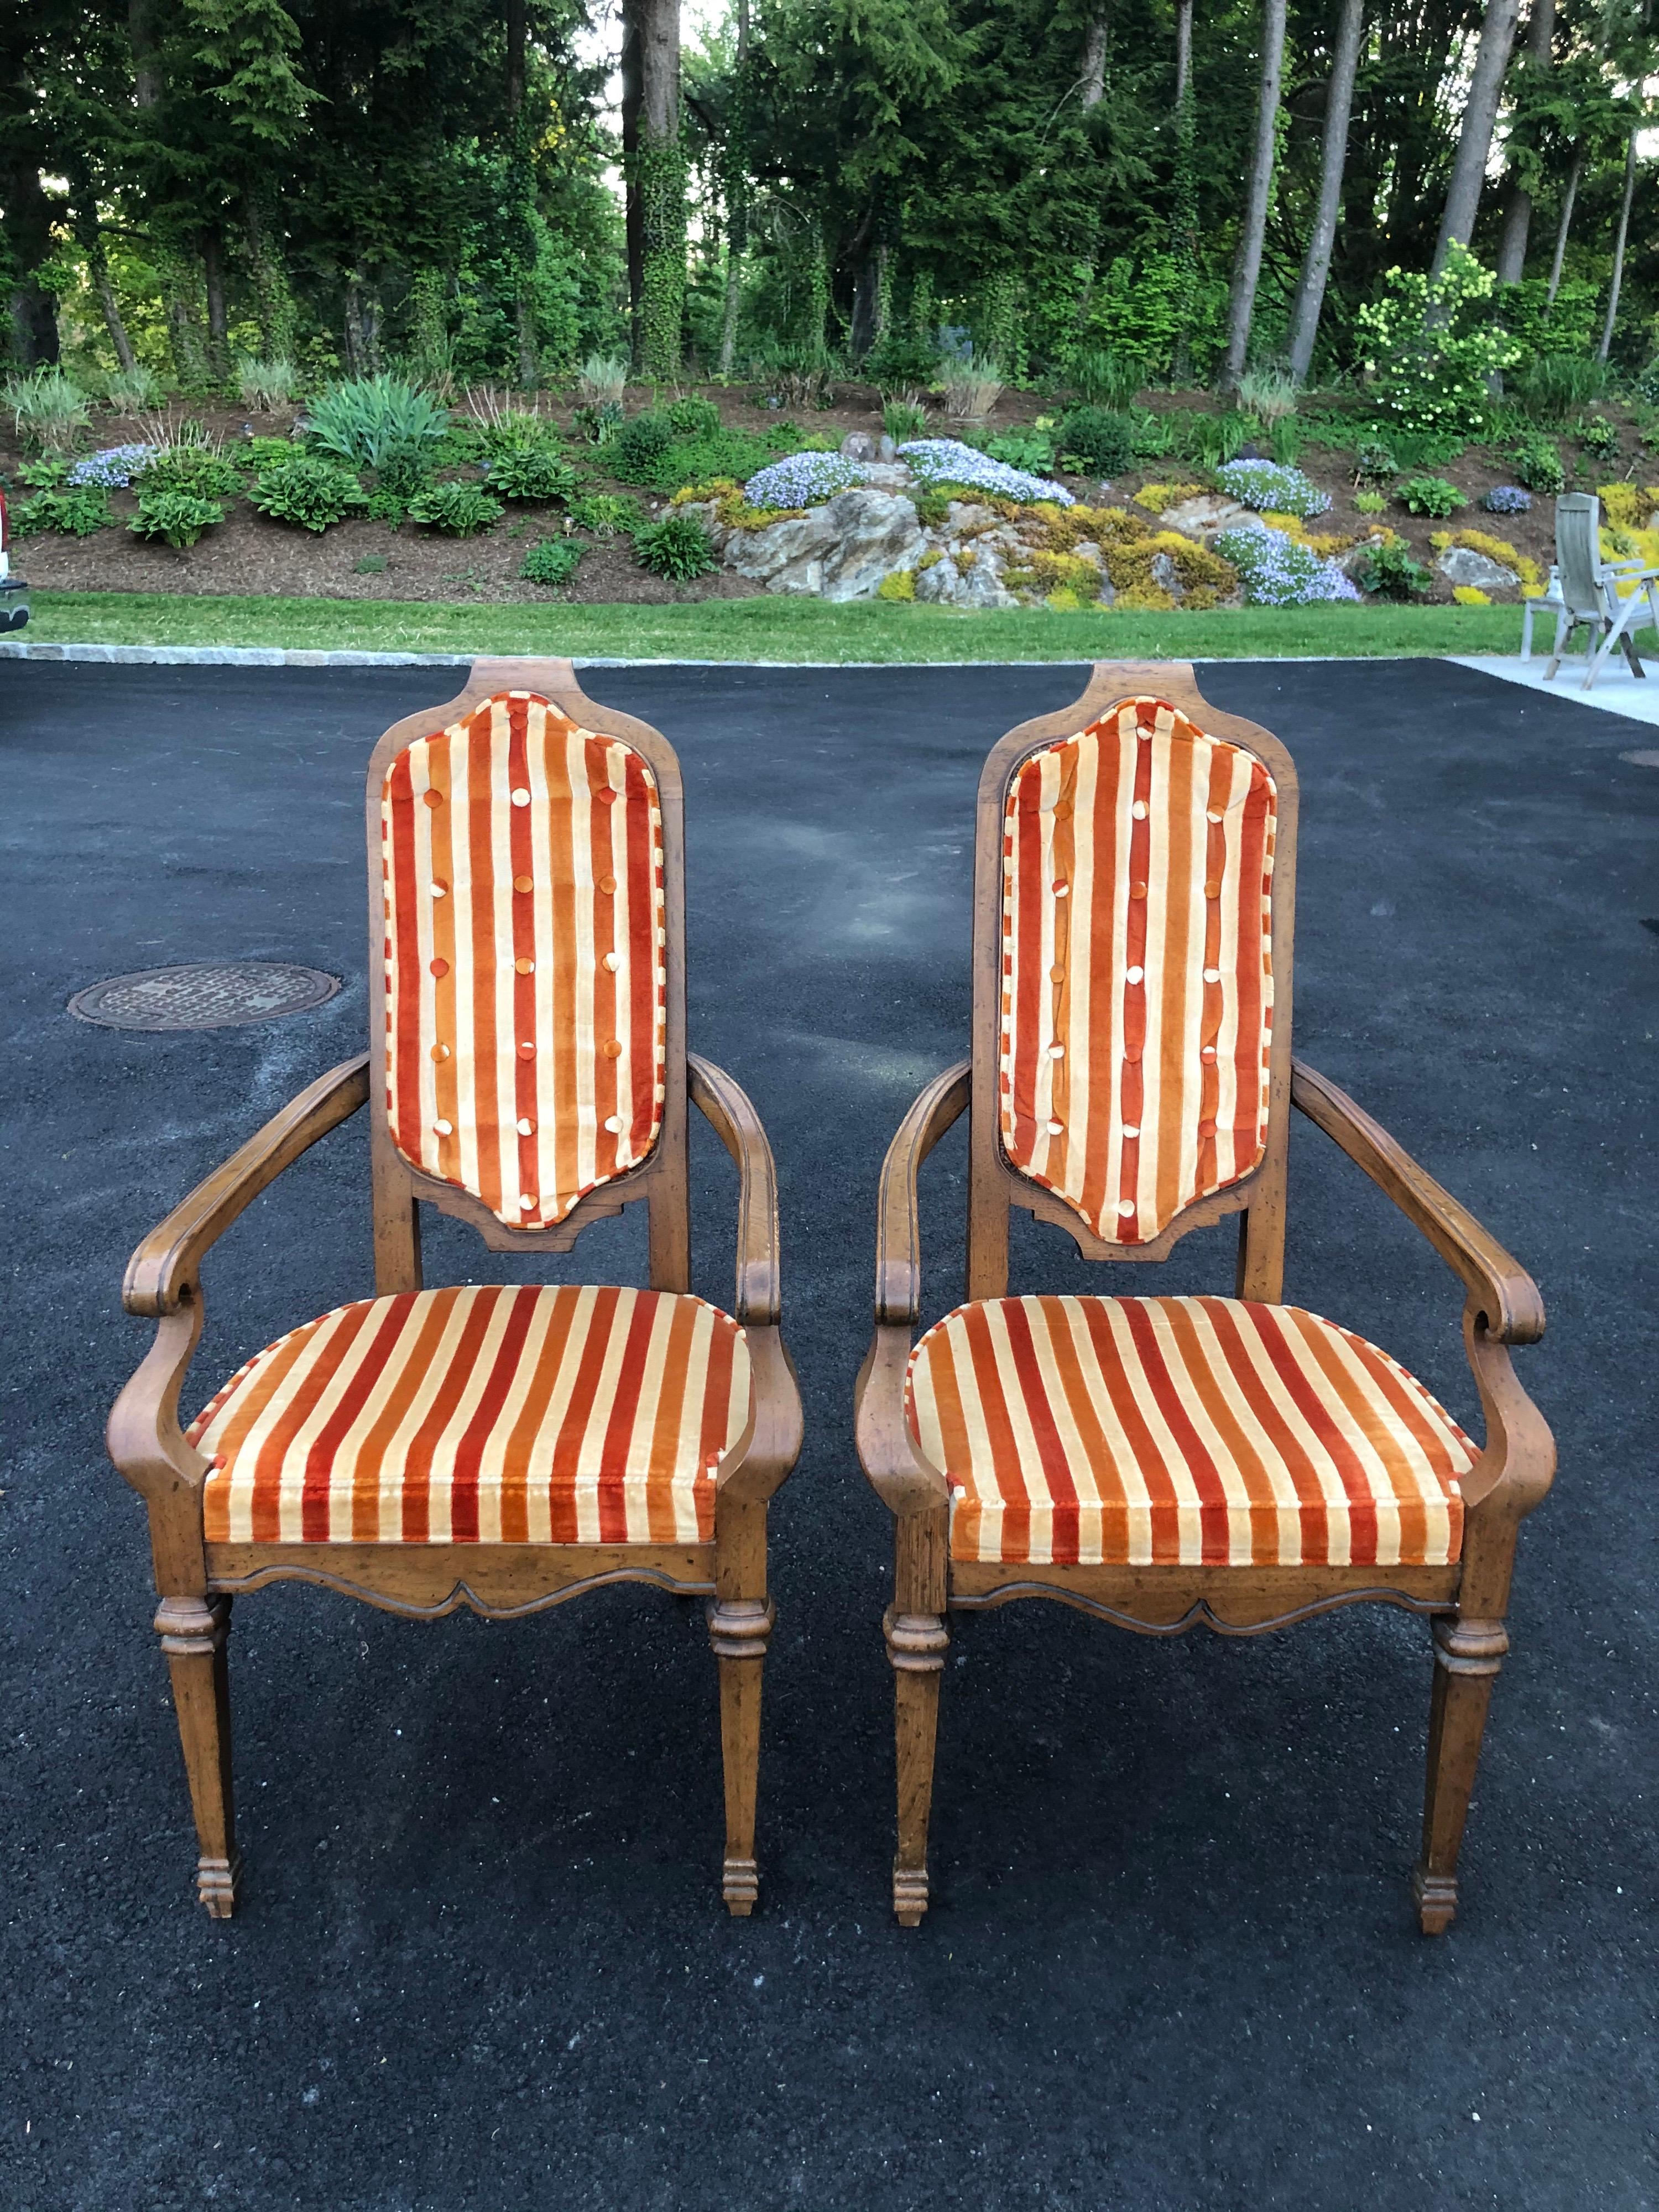 Pair of Hollywood Regency velvet arm chairs by Heritage . Whimsical pinstripe design with a two tone gold and a raspberry color velvet. The velvet covers the fully caned back and the fabric has little buttons that come thru the caning on the reverse